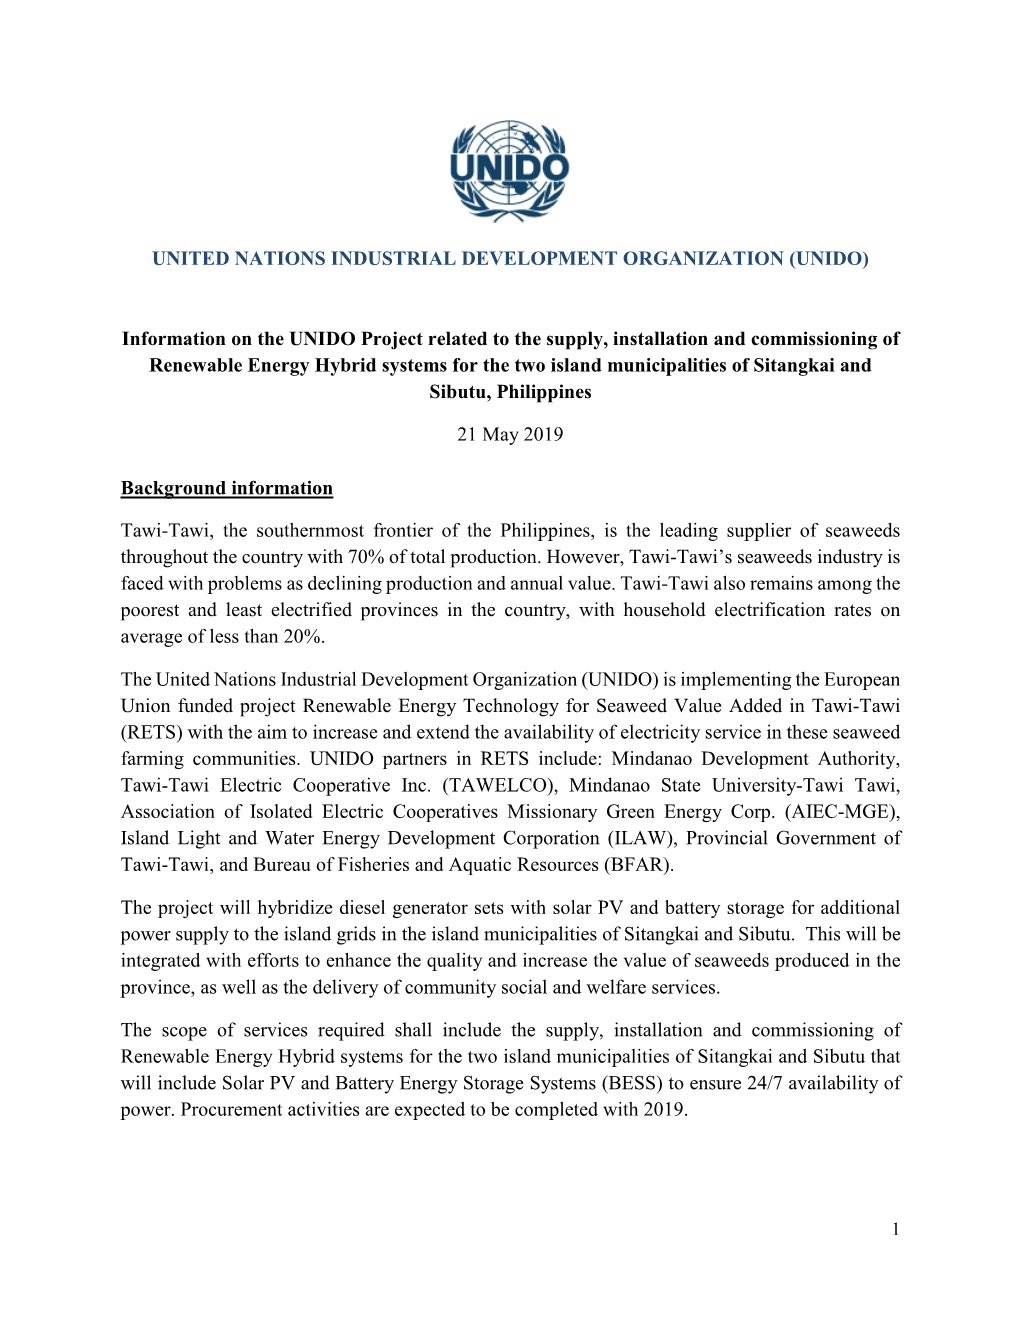 Information on the UNIDO Project Related to the Supply, Installation